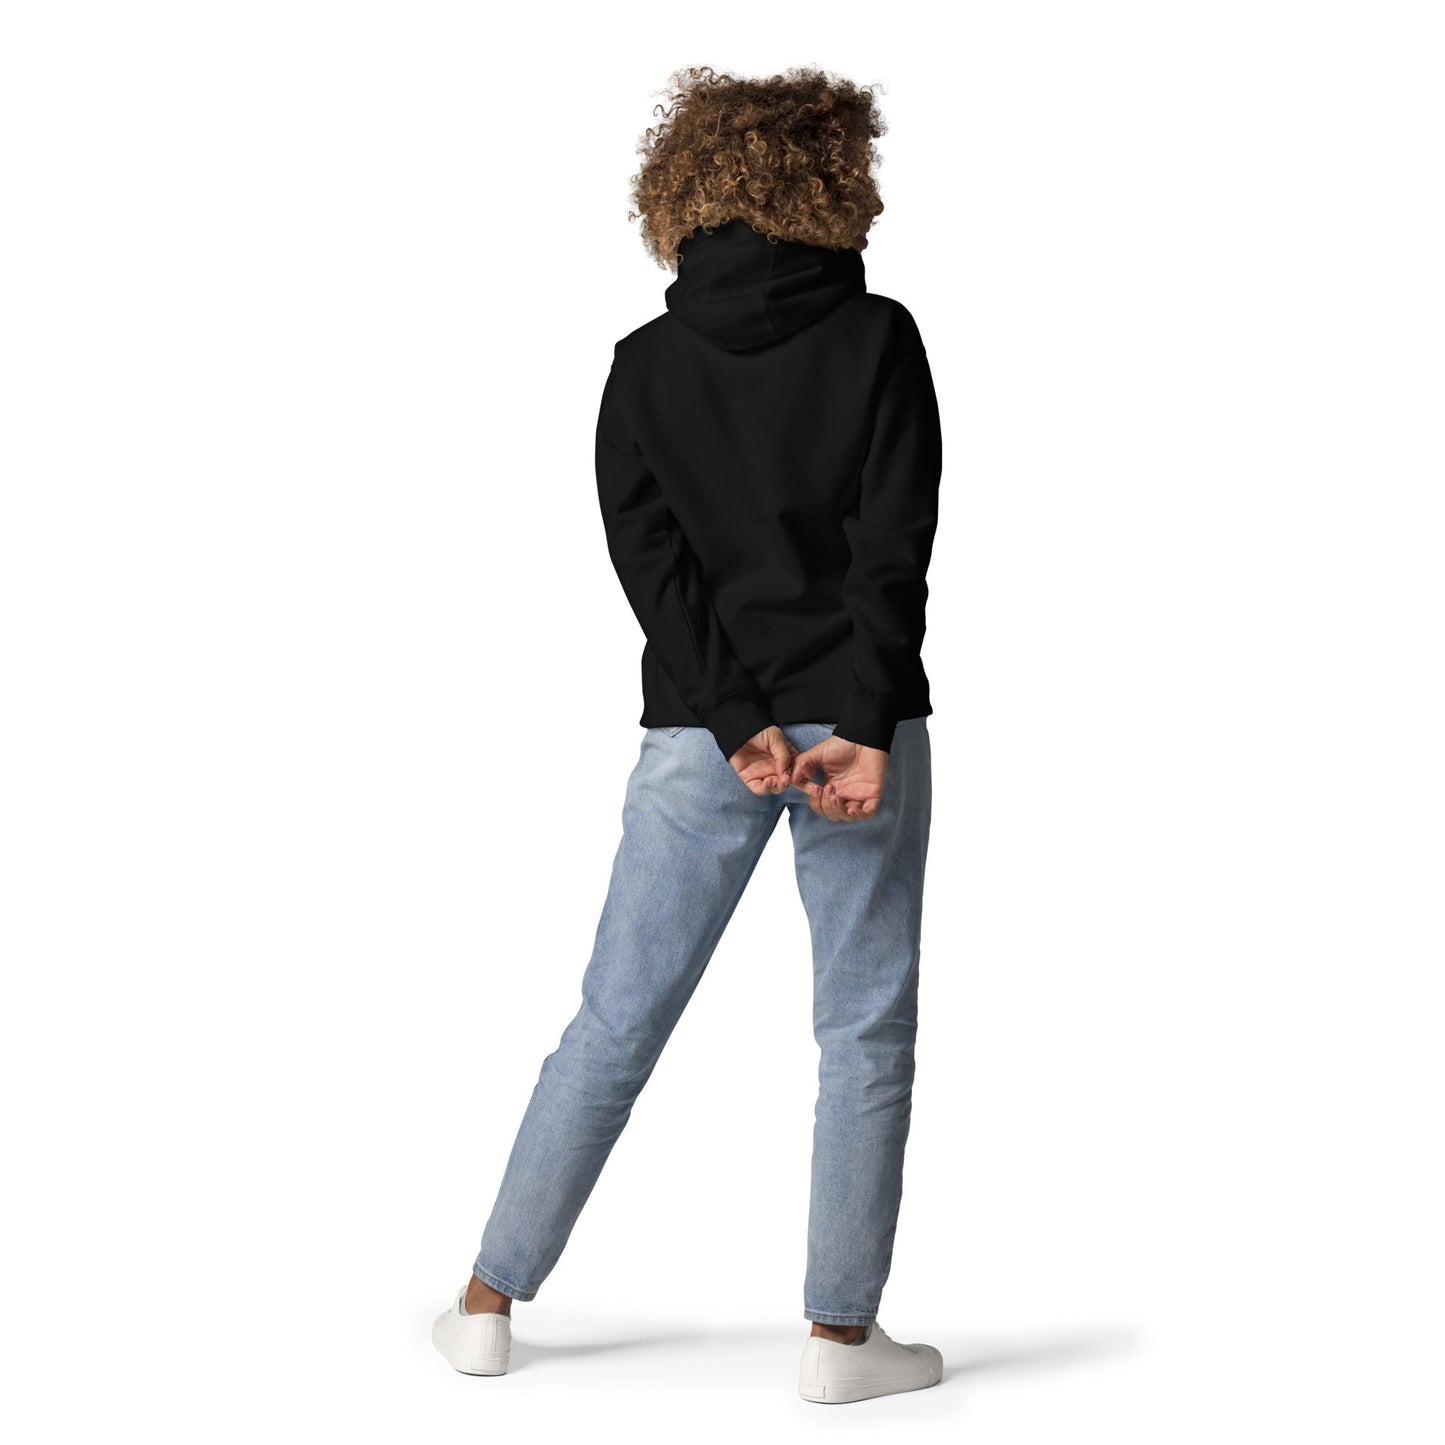 Draft Label Embroidered Unisex Hoodie - BeExtra! Apparel & More